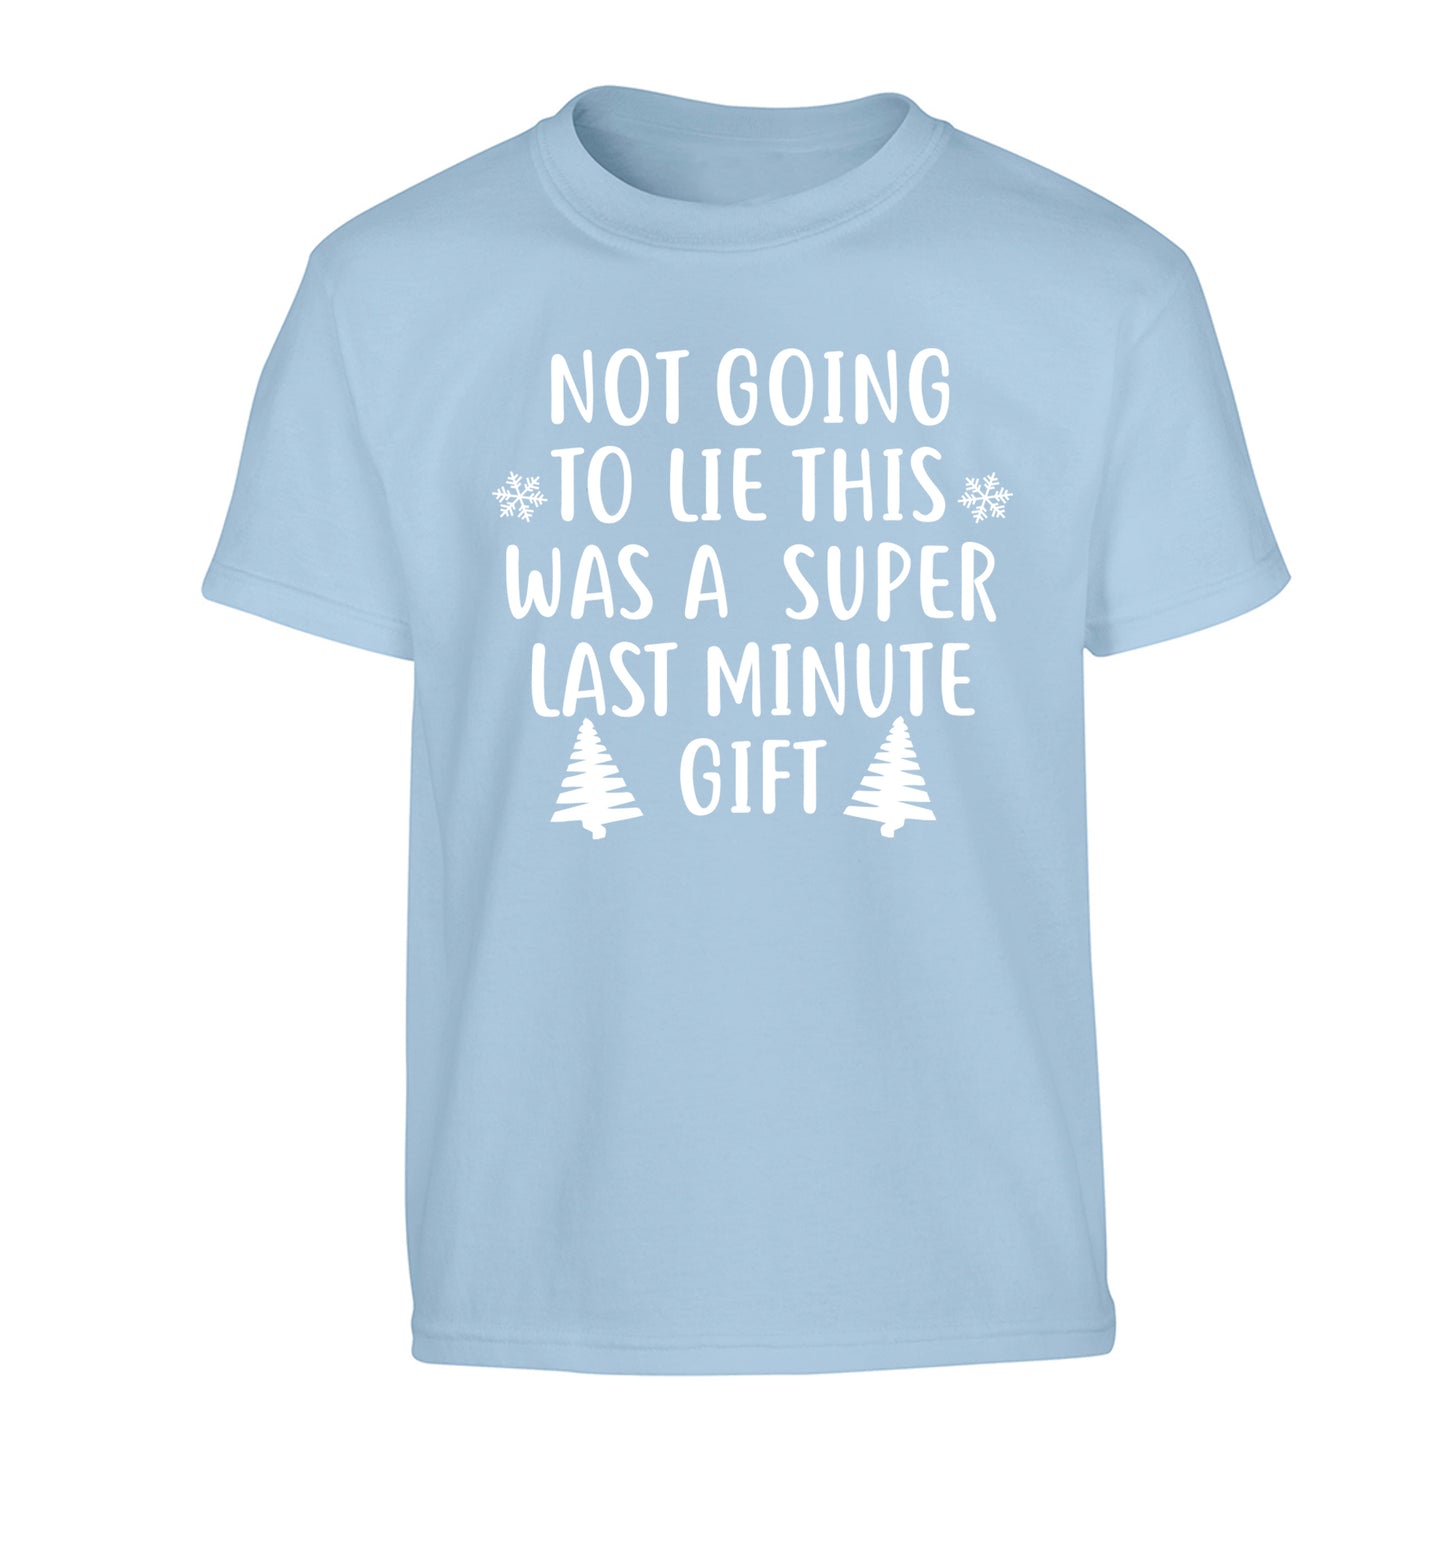 Not going to lie this was a super last minute gift Children's light blue Tshirt 12-13 Years